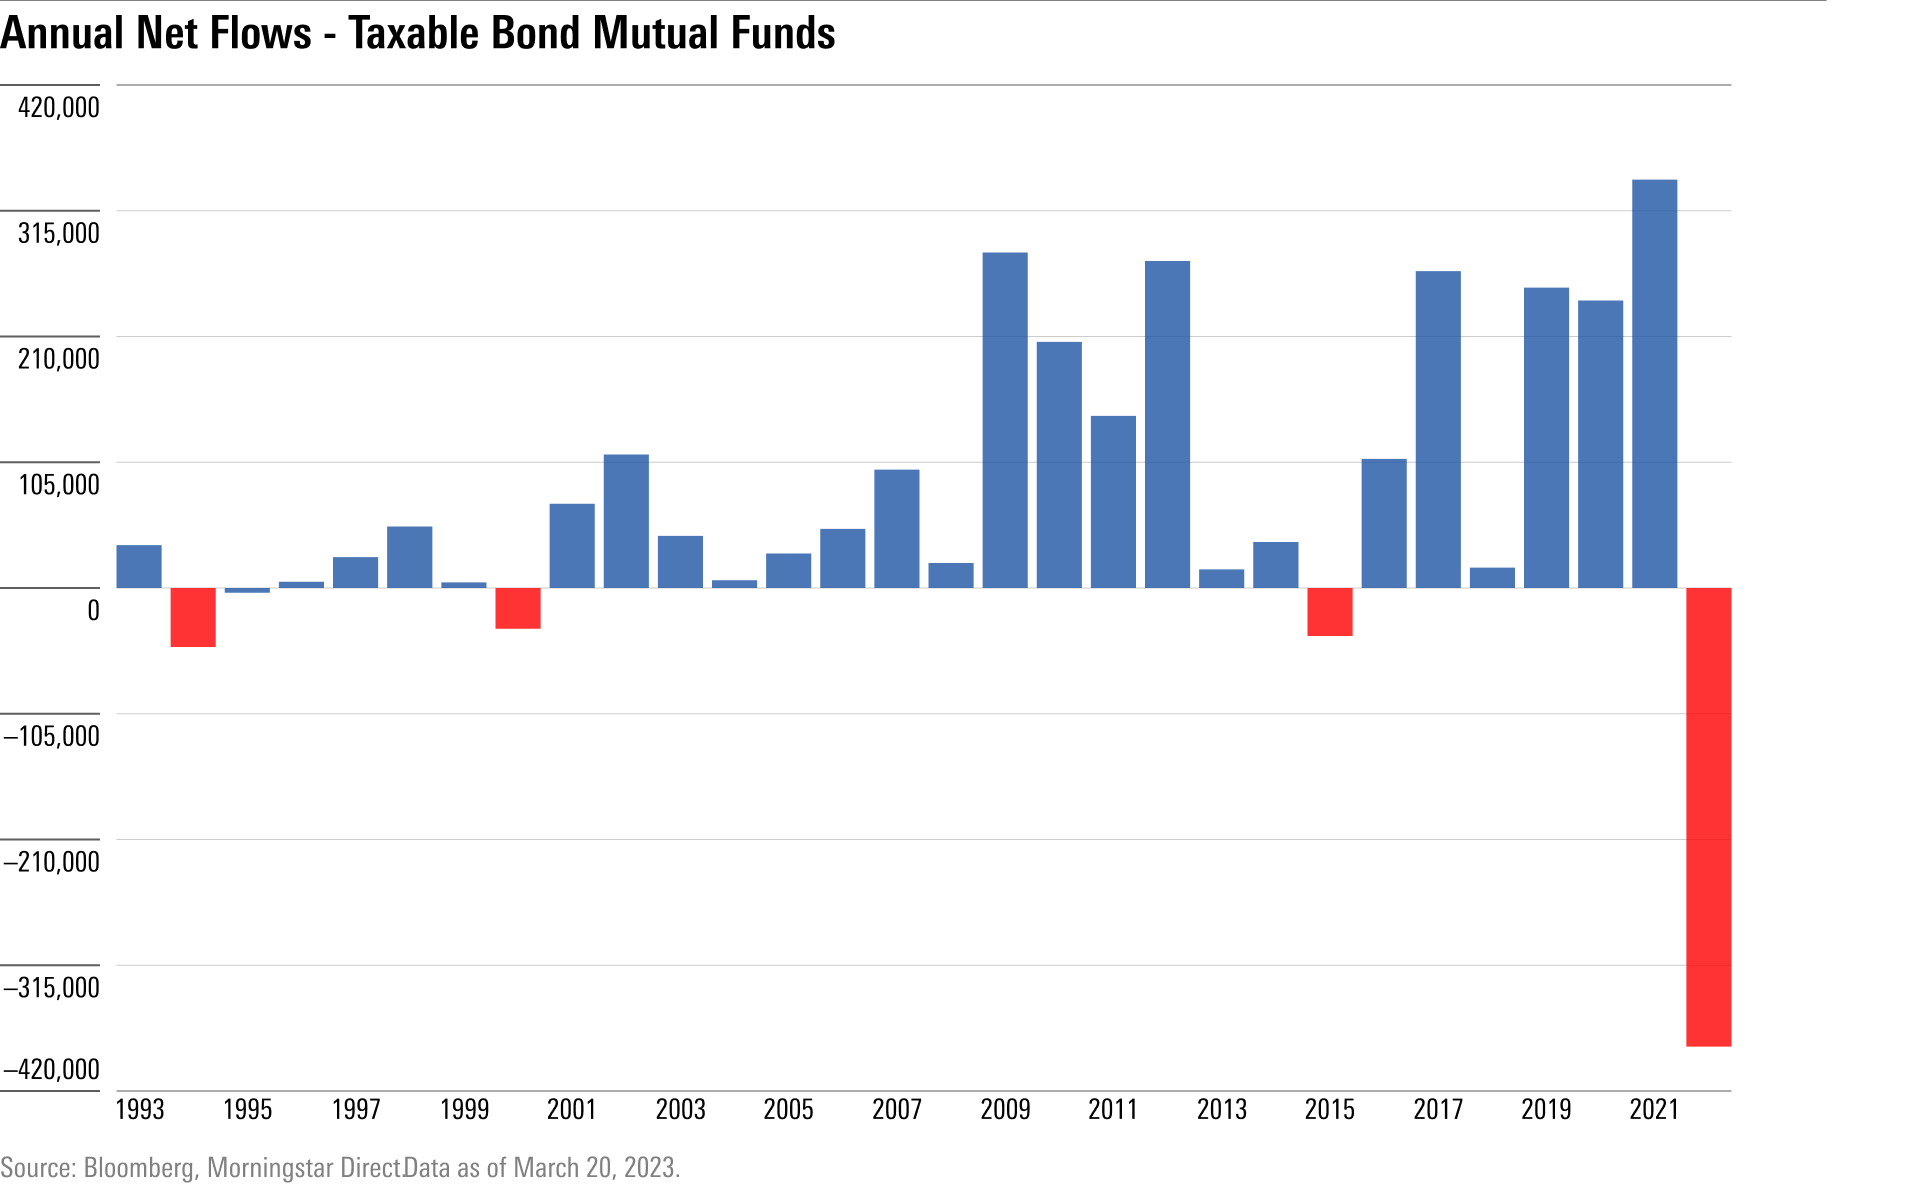 Bar chart showing annual net flows of taxable bond mutual funds from 1993-2022.